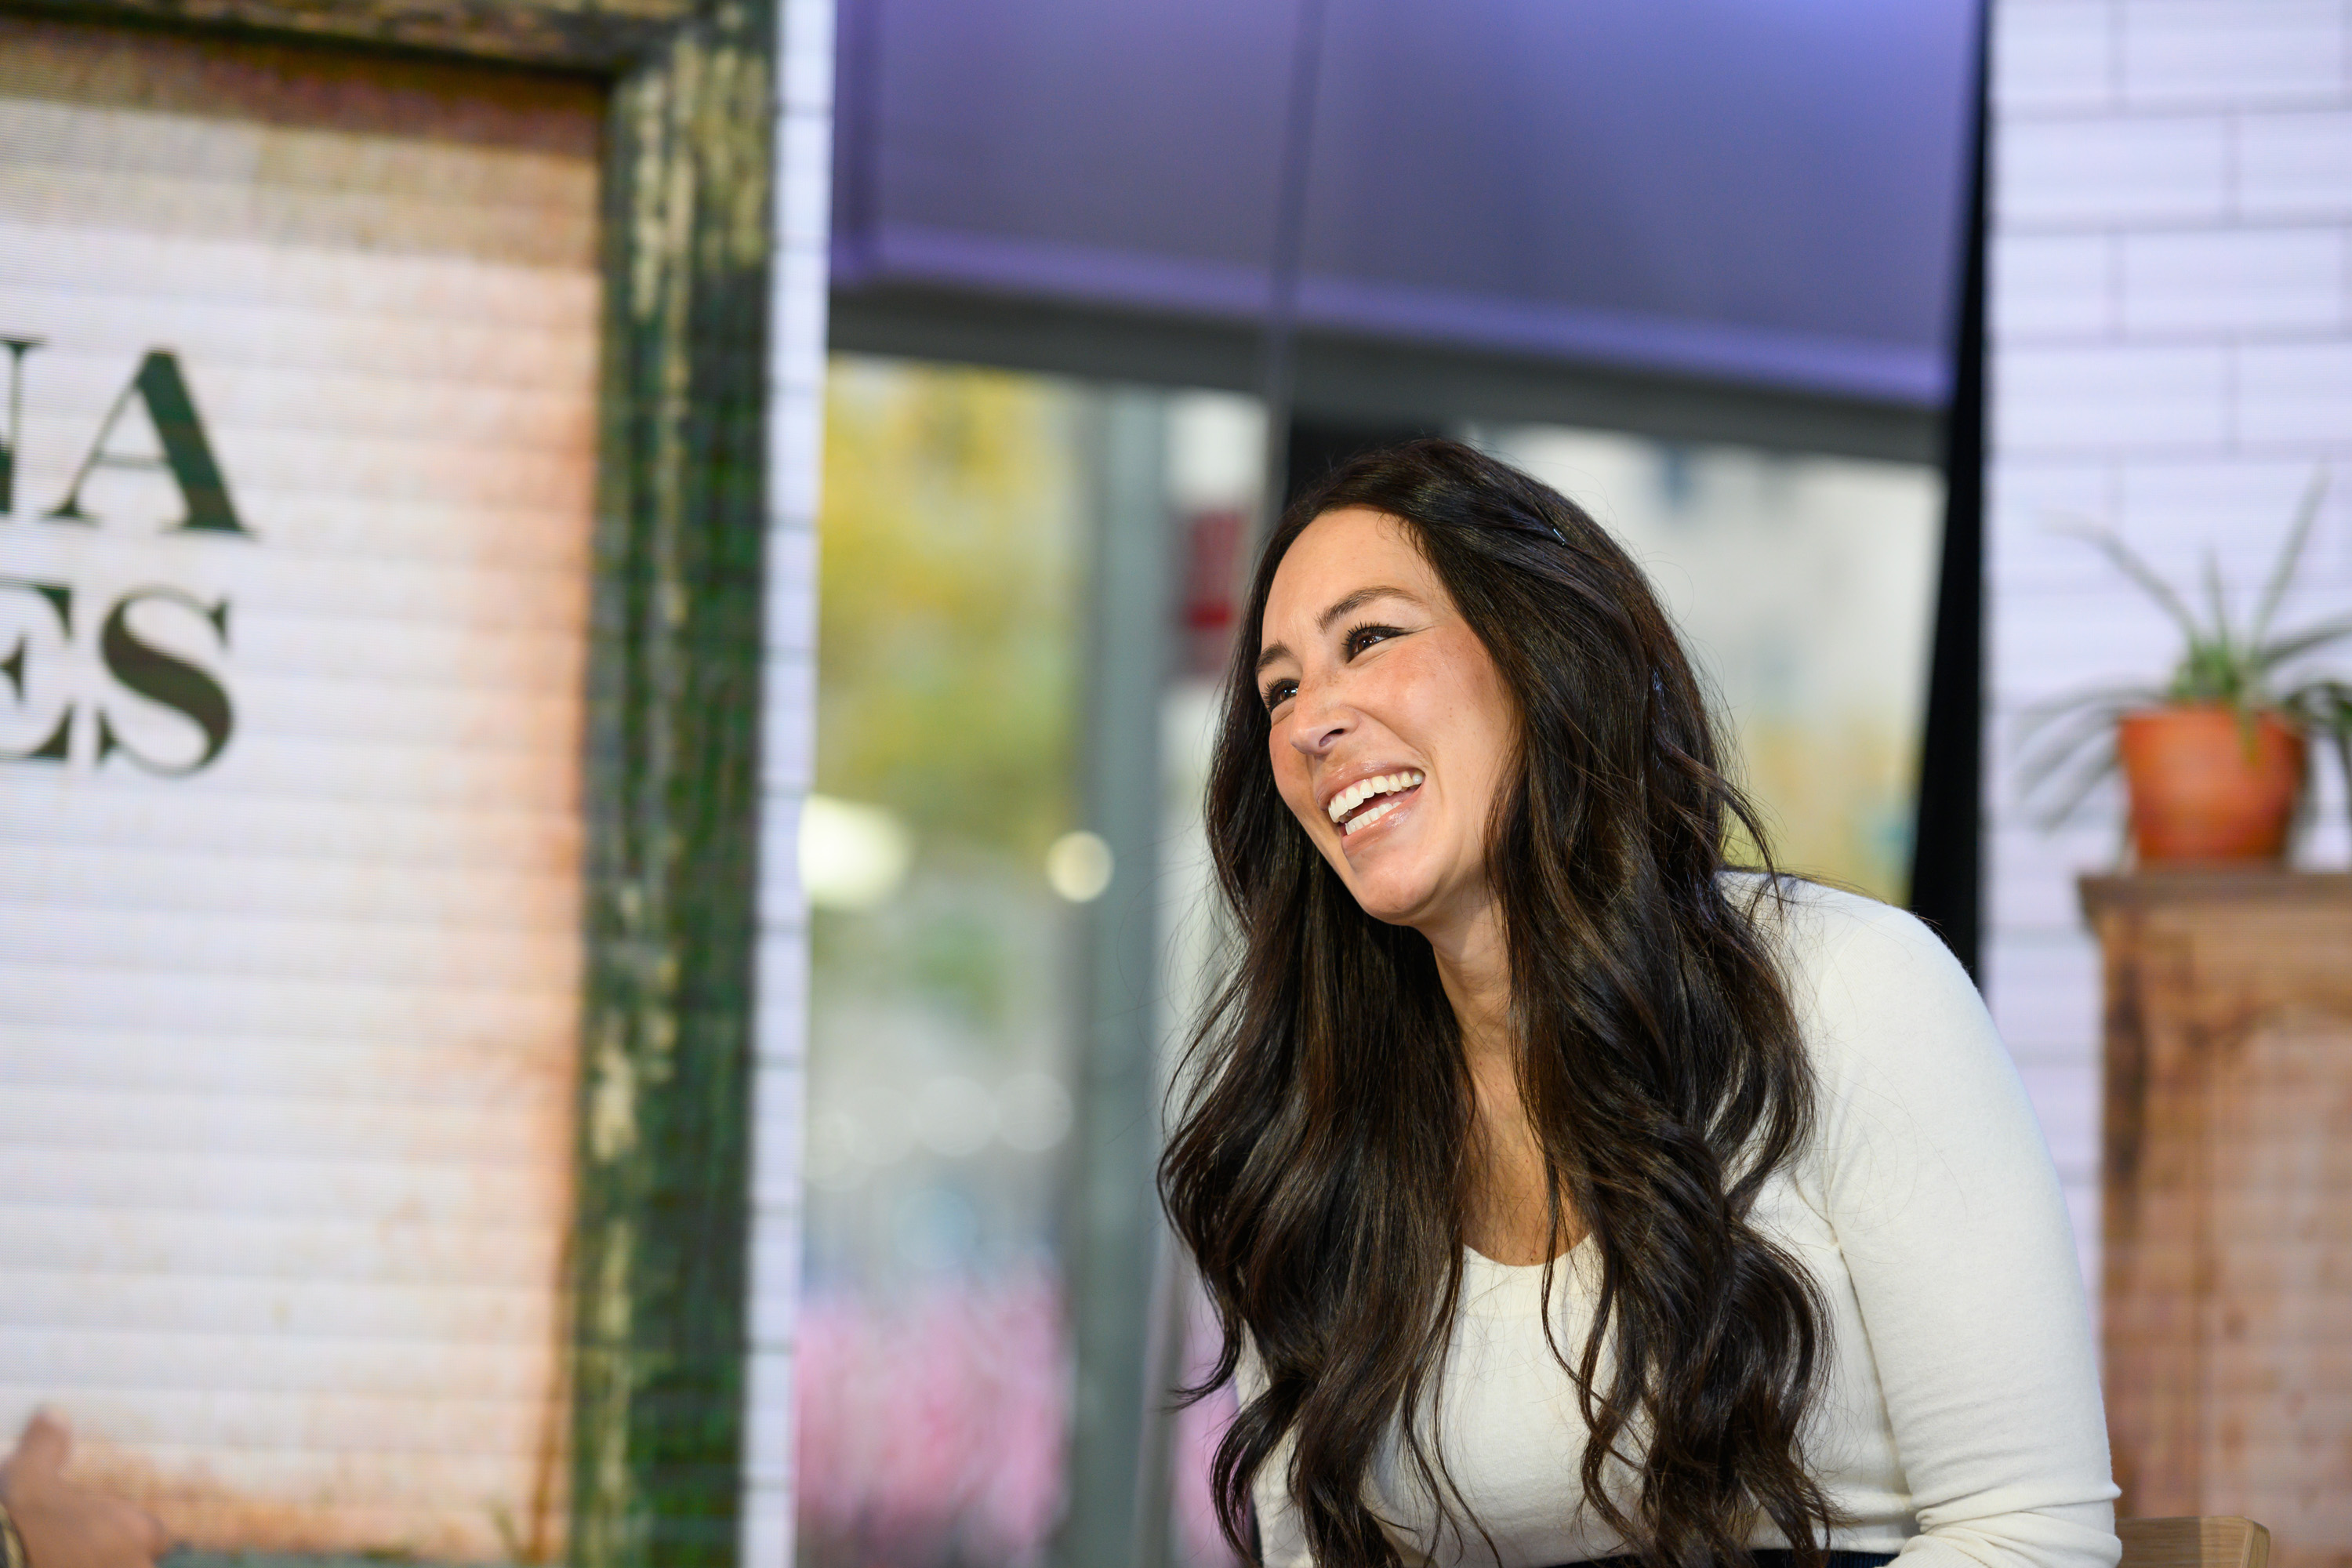 Joanna Gaines laughs during an interview on the Today show